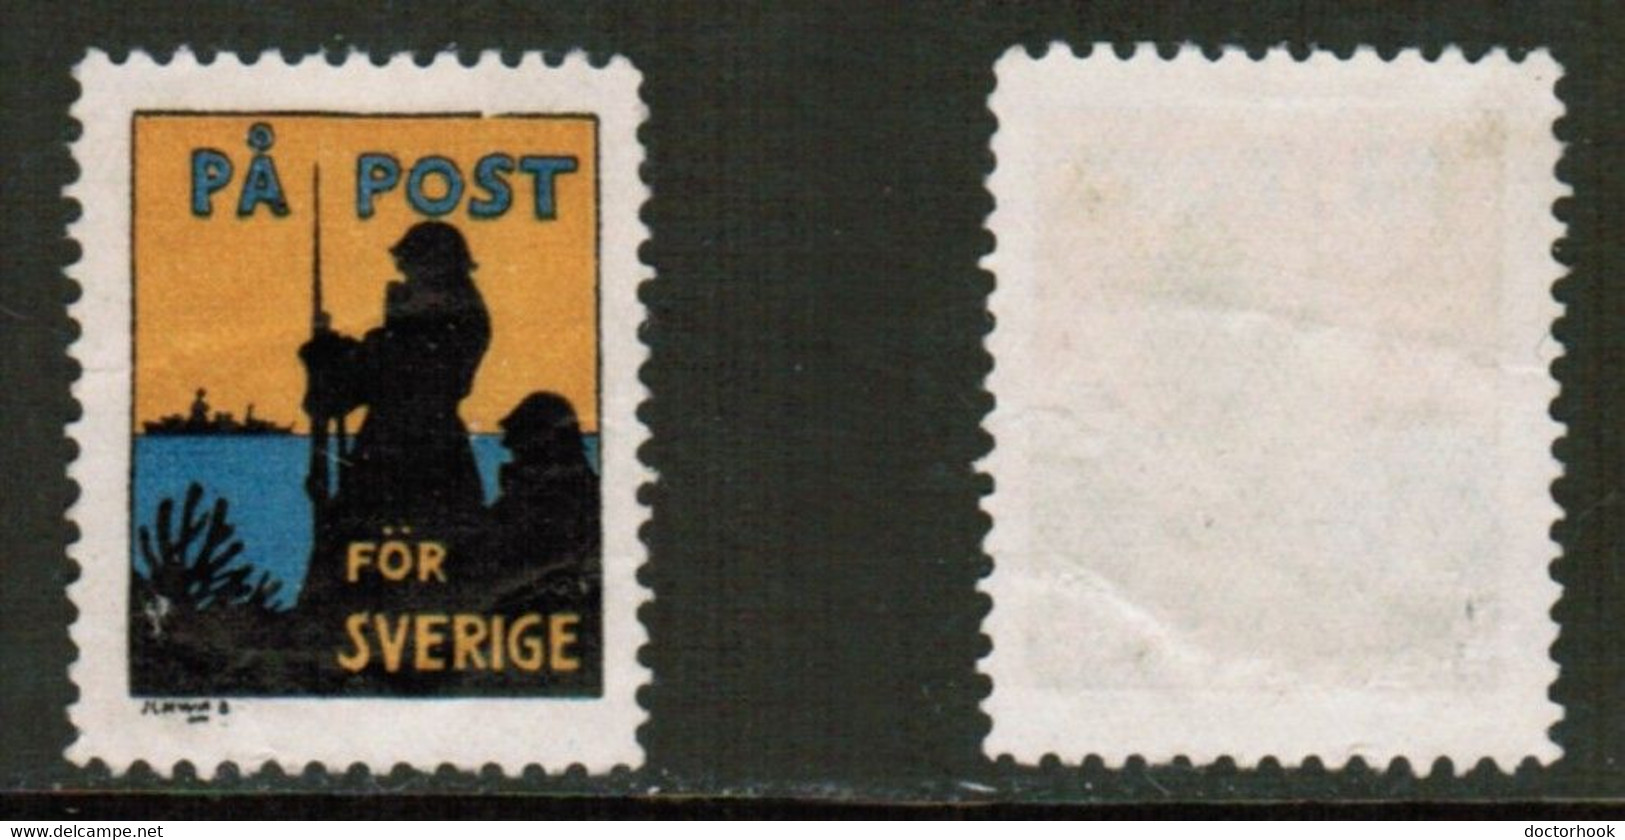 SWEDEN   UNLISTED MILITARY STAMP UNUSED (CONDITION AS PER SCAN) (Stamp Scan # 839-7) - Militaires